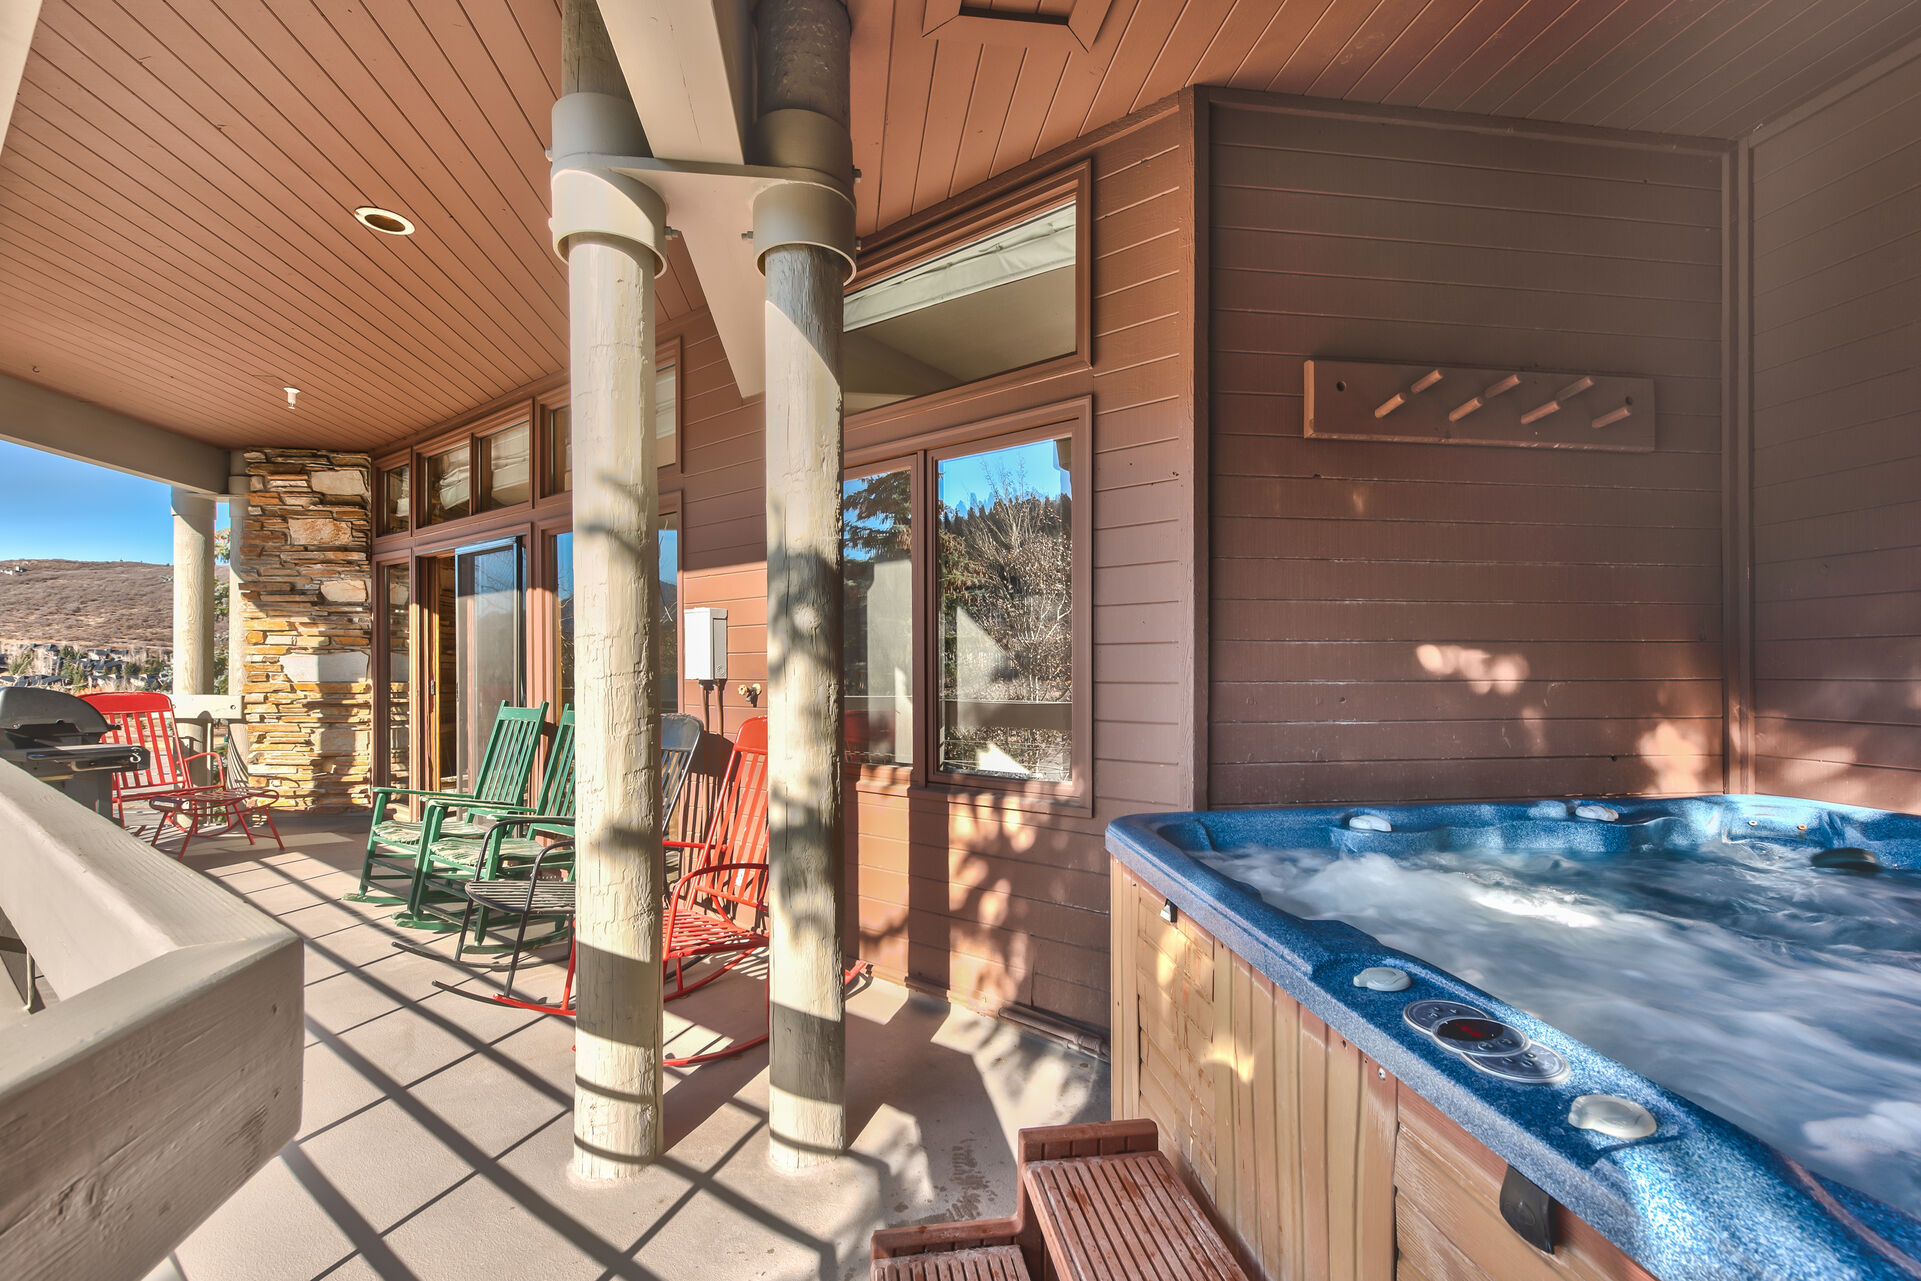 Private Deck with Hot Tub, Patio Seating, a BBQ Grill and Fabulous Views